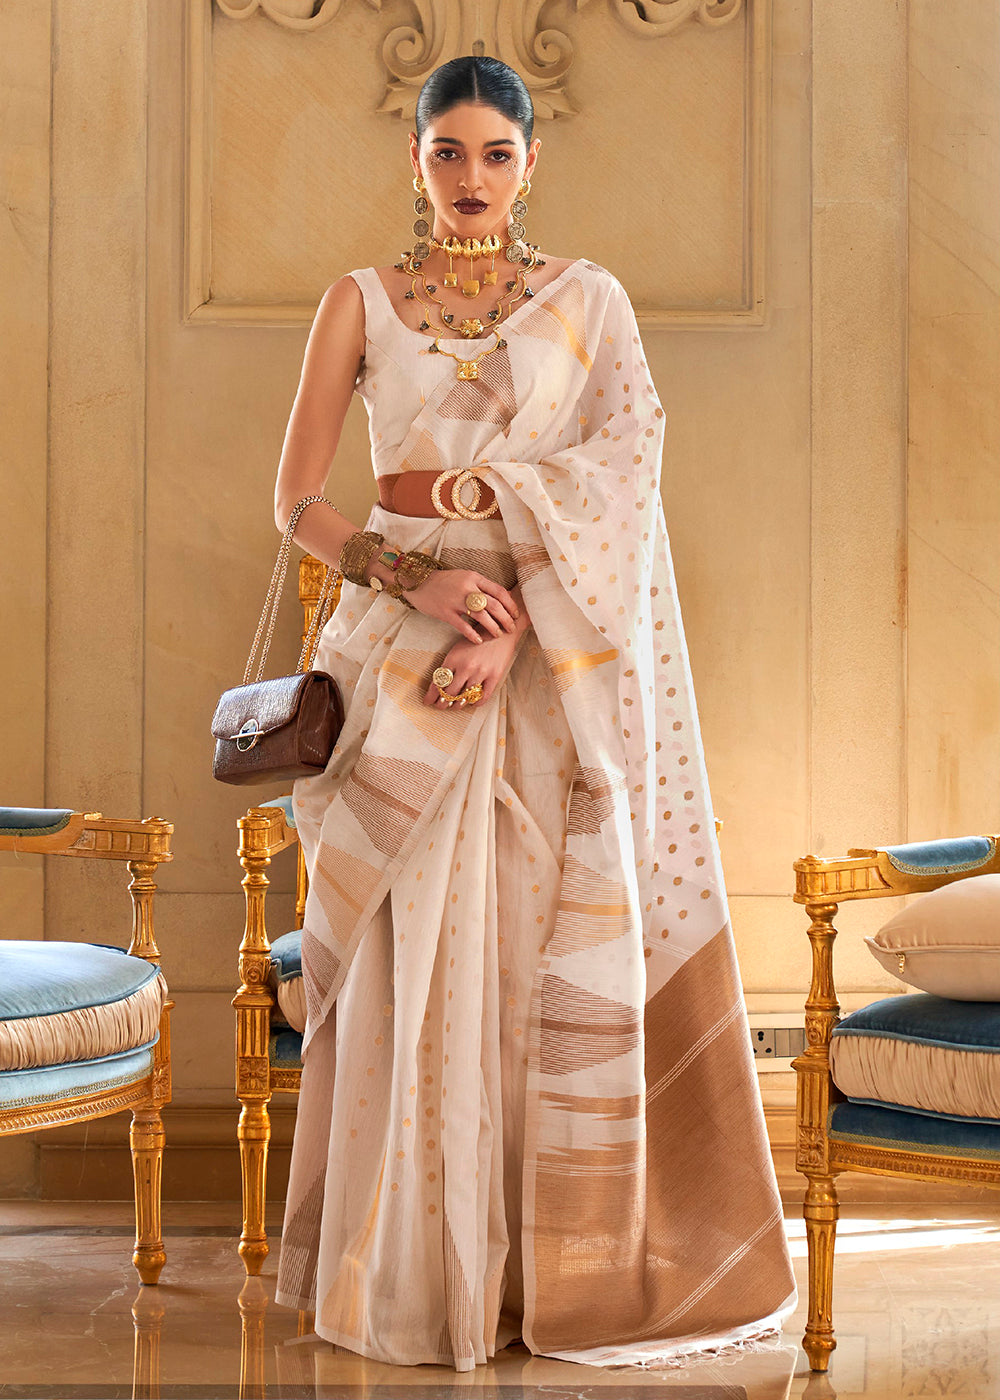 Buy Now Stunning White Tissue Zari Weaving Bollywood Saree Online in USA, UK, Canada & Worldwide at Empress Clothing.